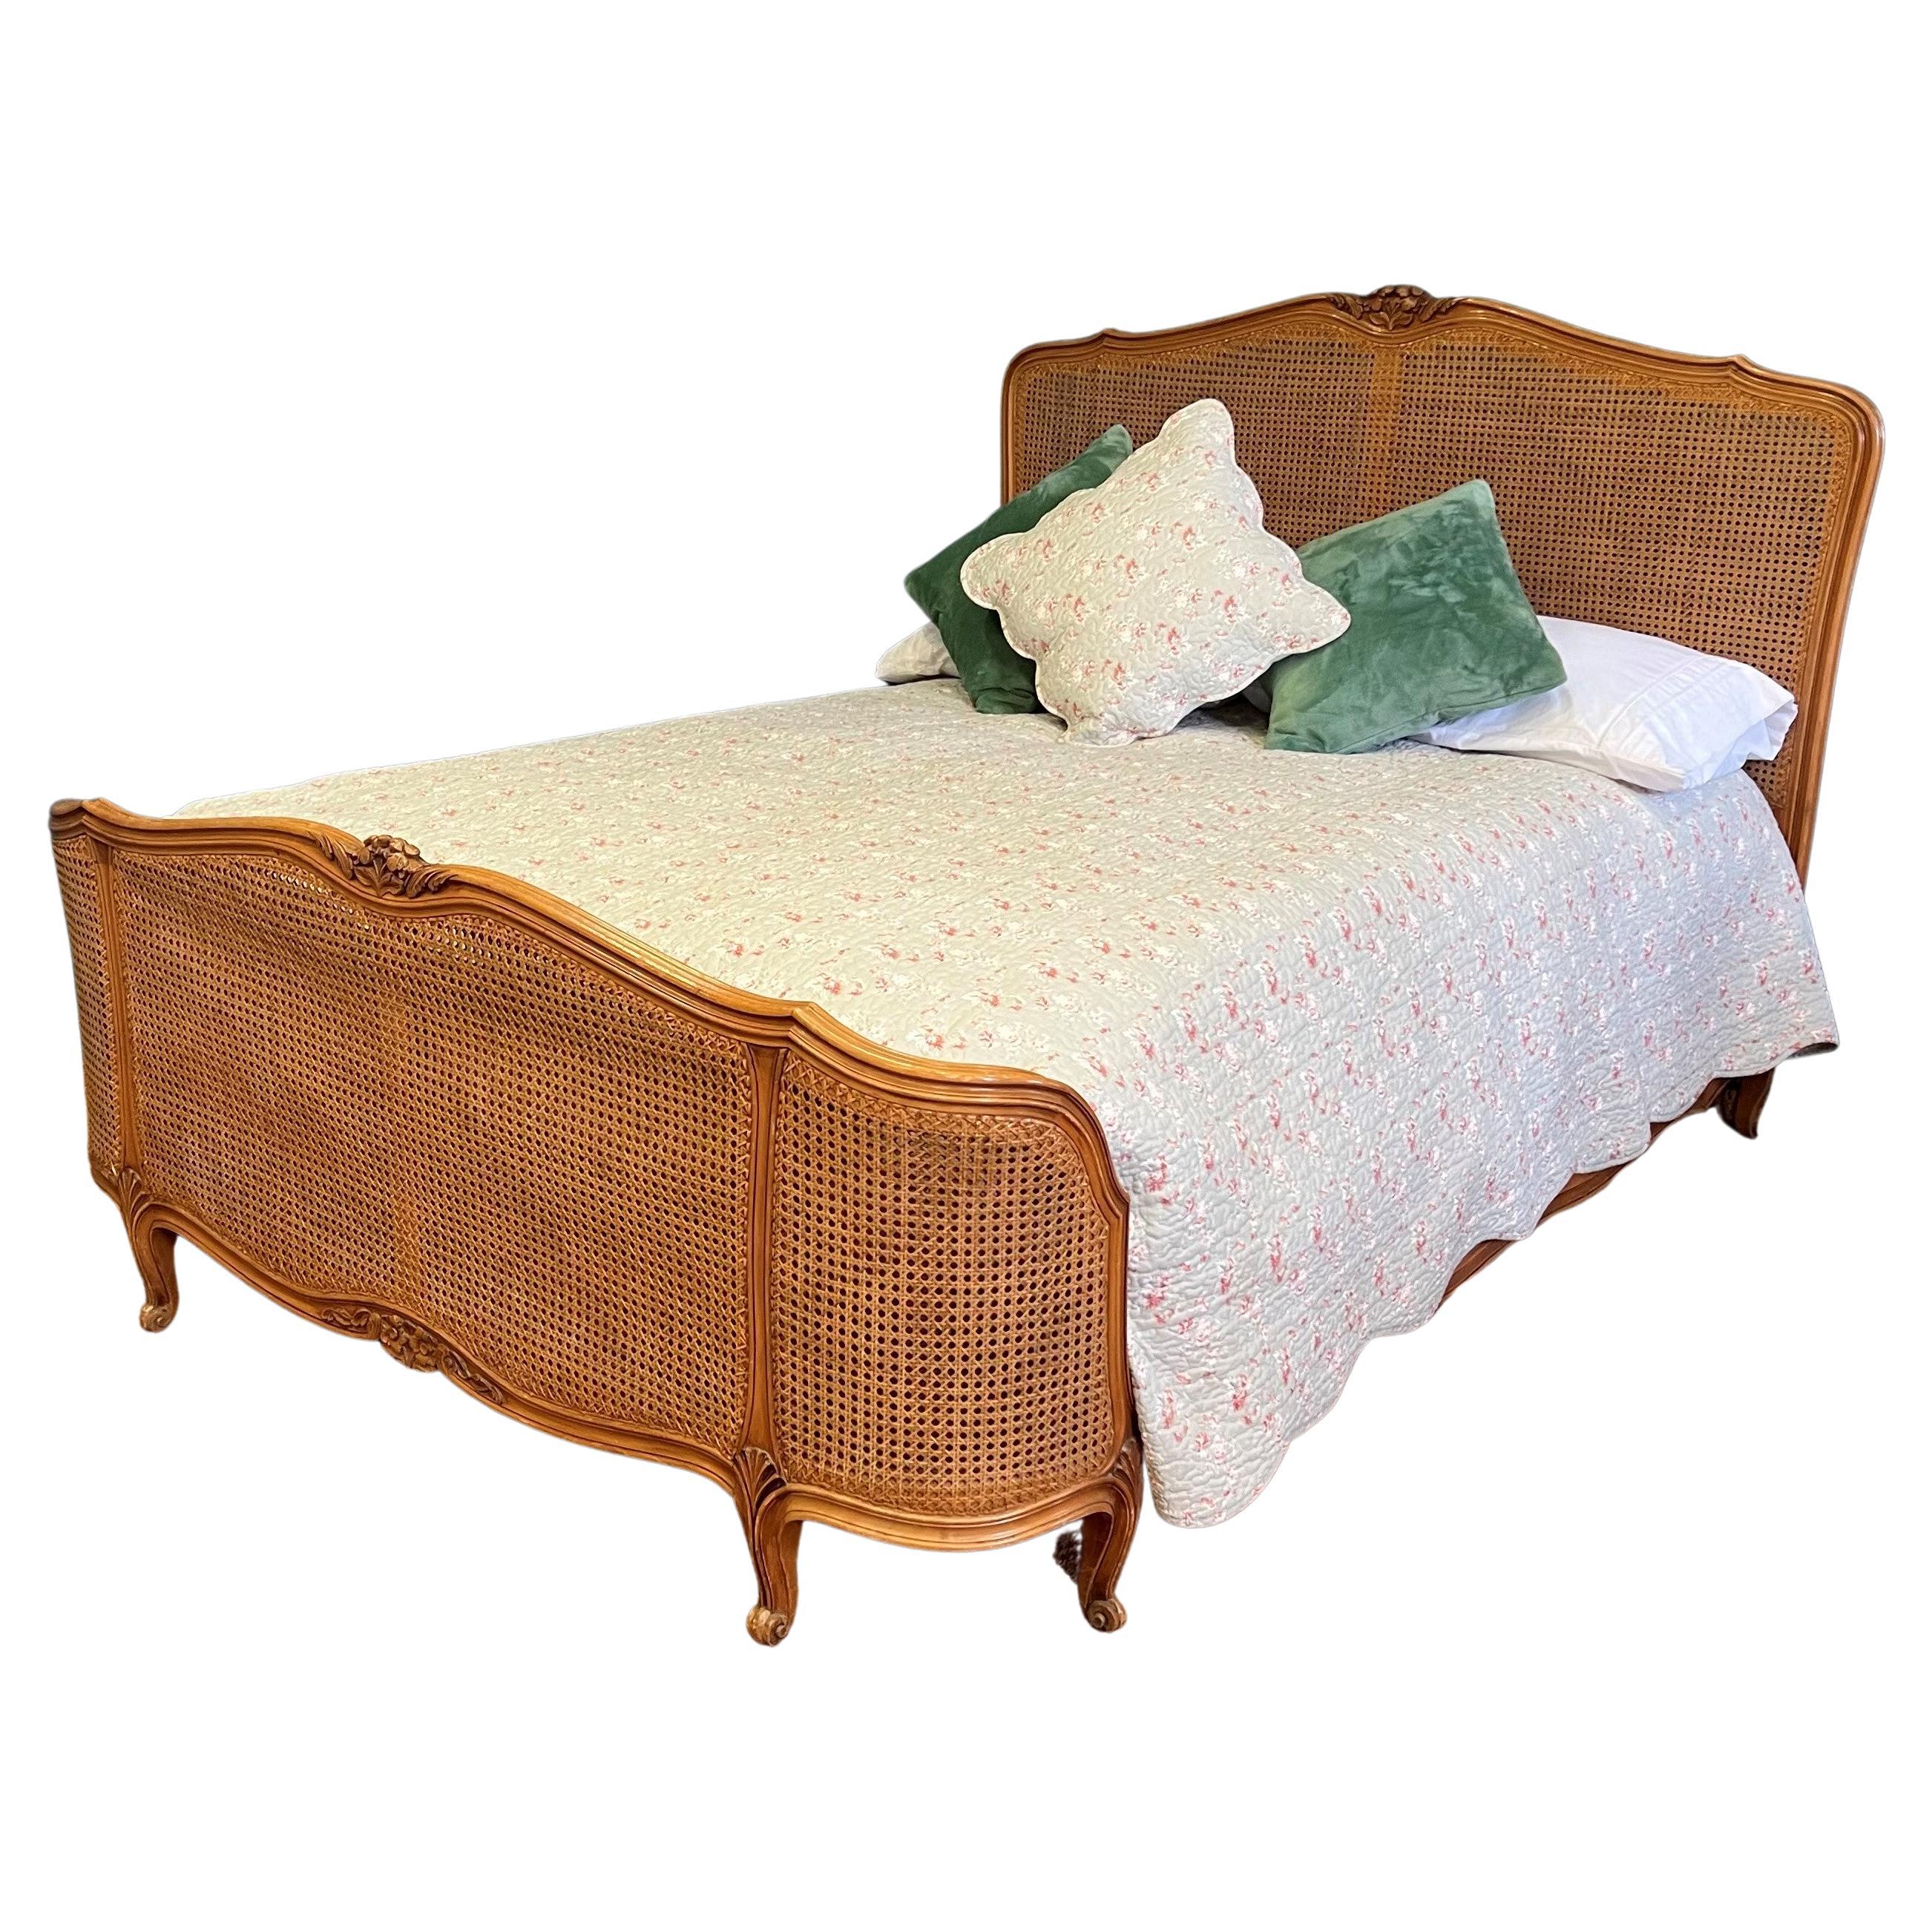 Double, Vintage French Demi Corbeille Caned Bed